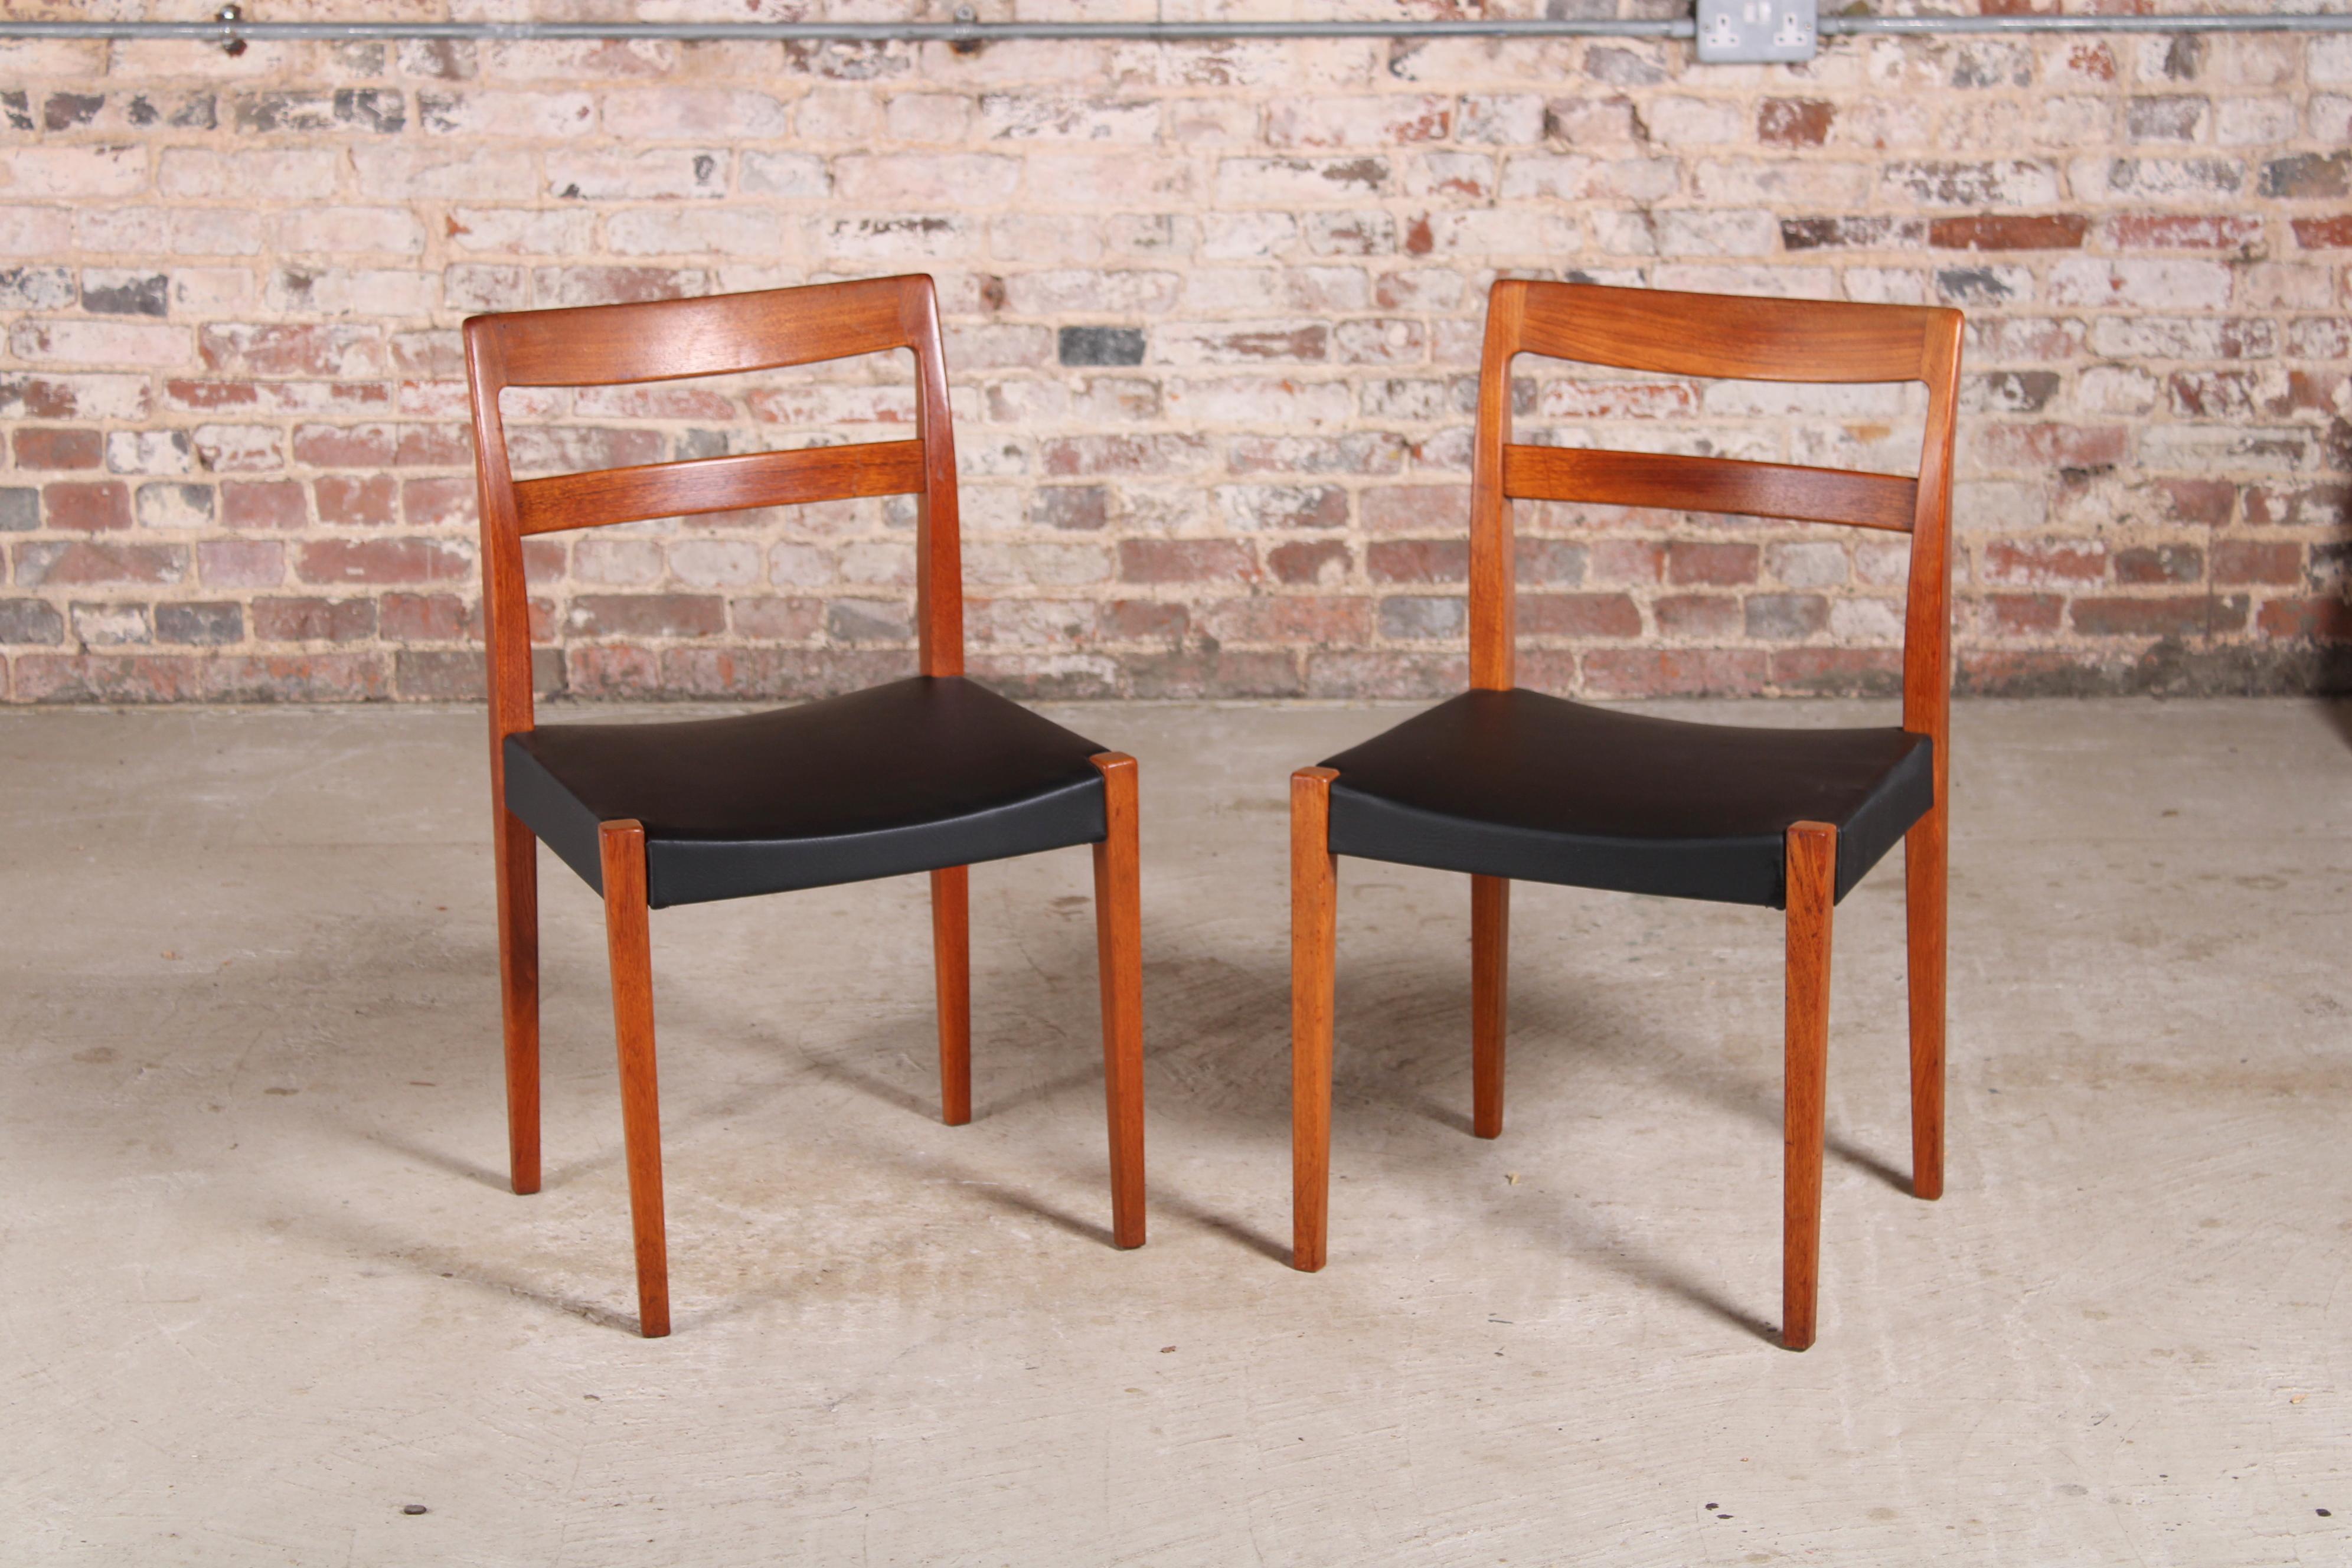 Set of 4 mid-century teak dining chairs by Nils Jonson for Troeds, Sweden, circa 1960s. Black vinyl seats. 

Dimensions: 44 W x 49 D x 79 H cm
Seat height: 45 cm.